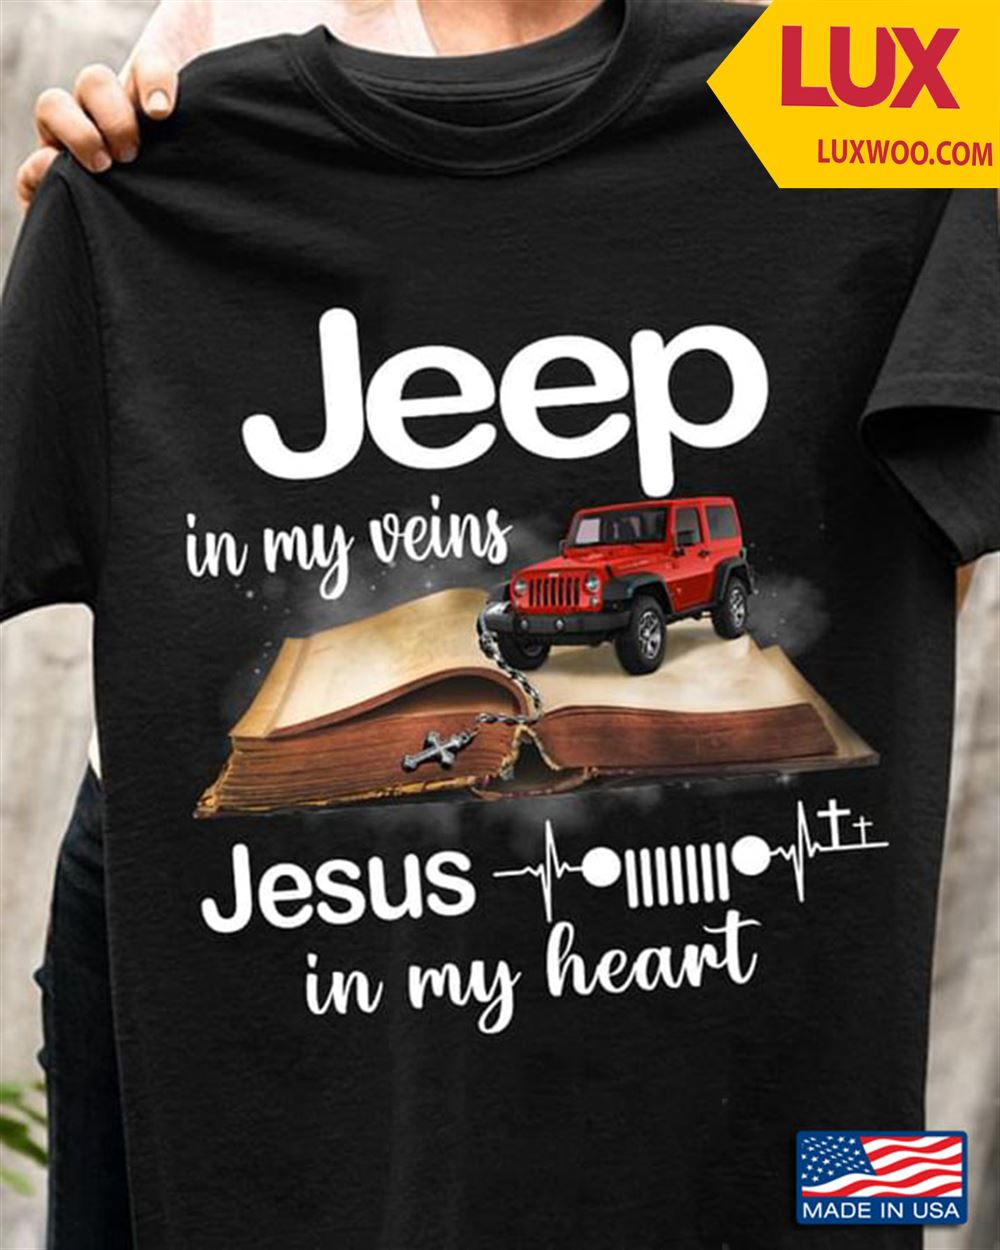 Jeep In My Veins Jesus In My Heart Tshirt Size Up To 5xl